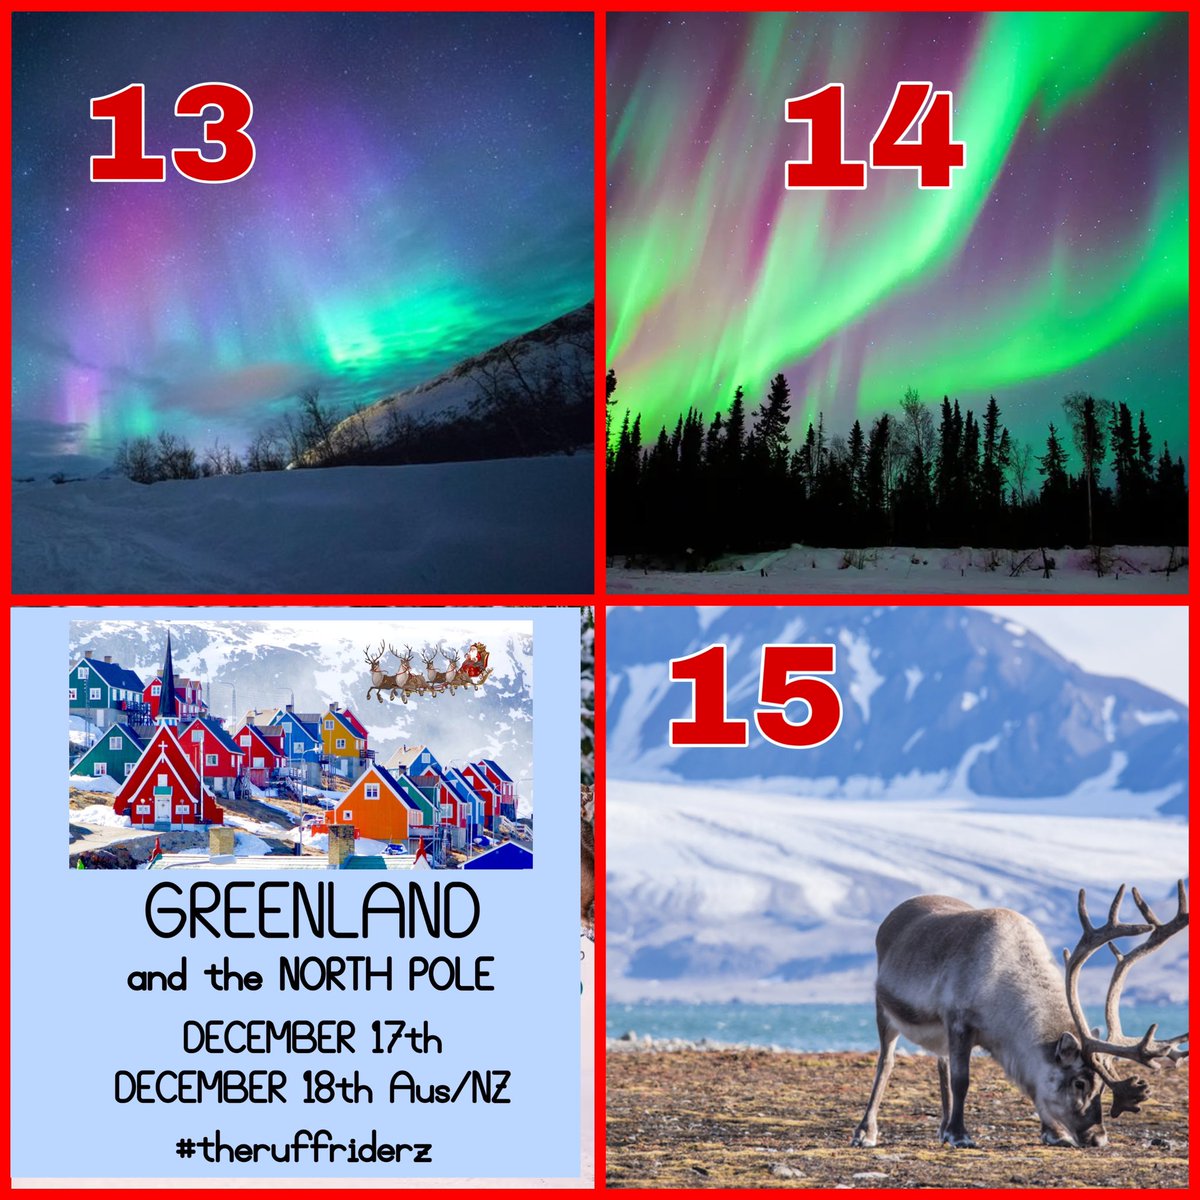 Here are your ride backgrounds to Greenland and the North Pole #theruffriderz @theruffriderz @CloudRiderz @LilRiderz2